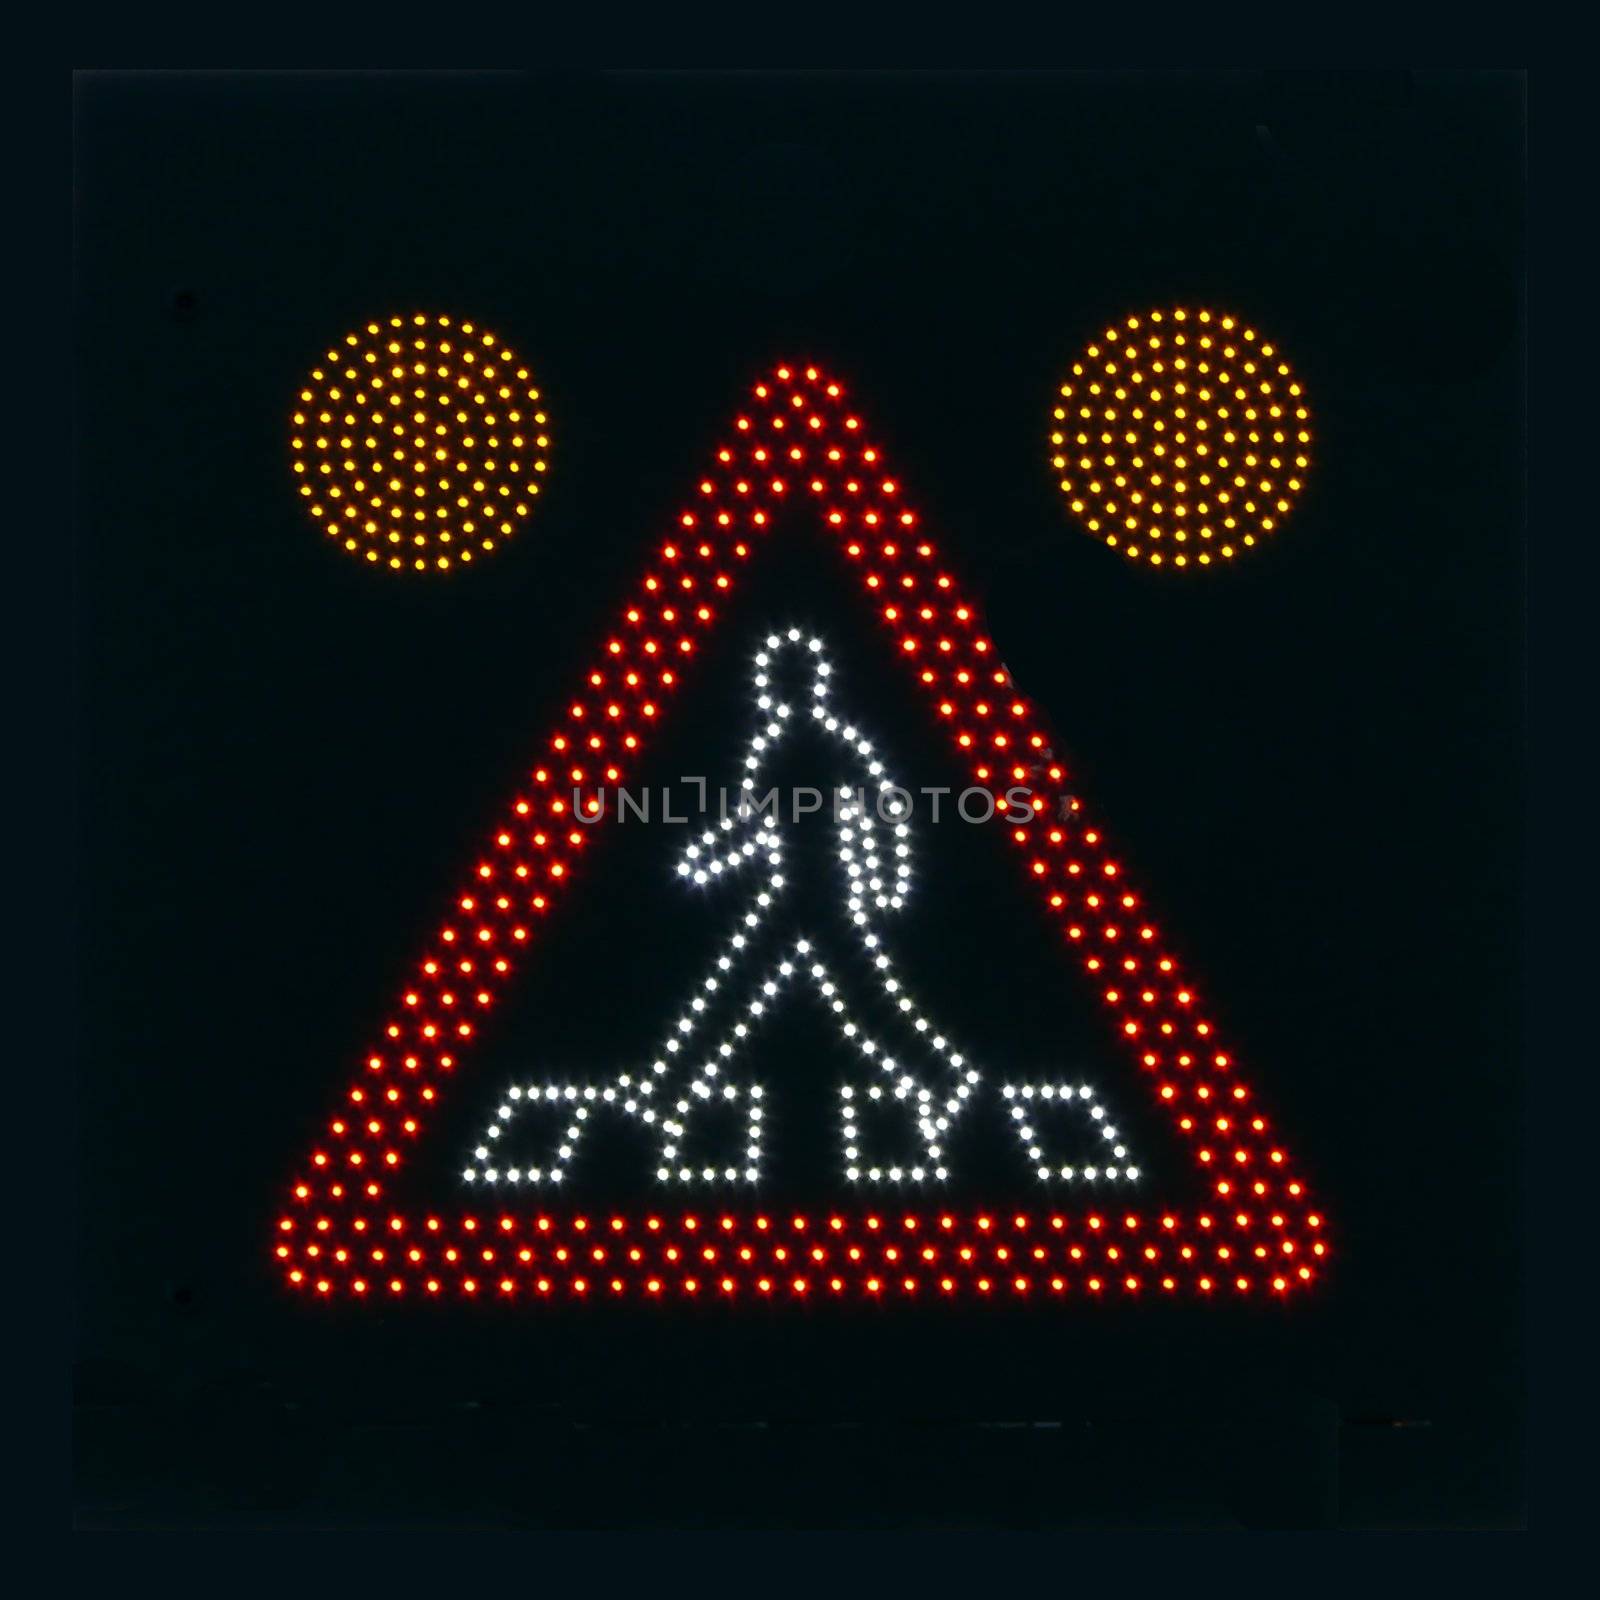 portrait of traffic sign warning for walking people